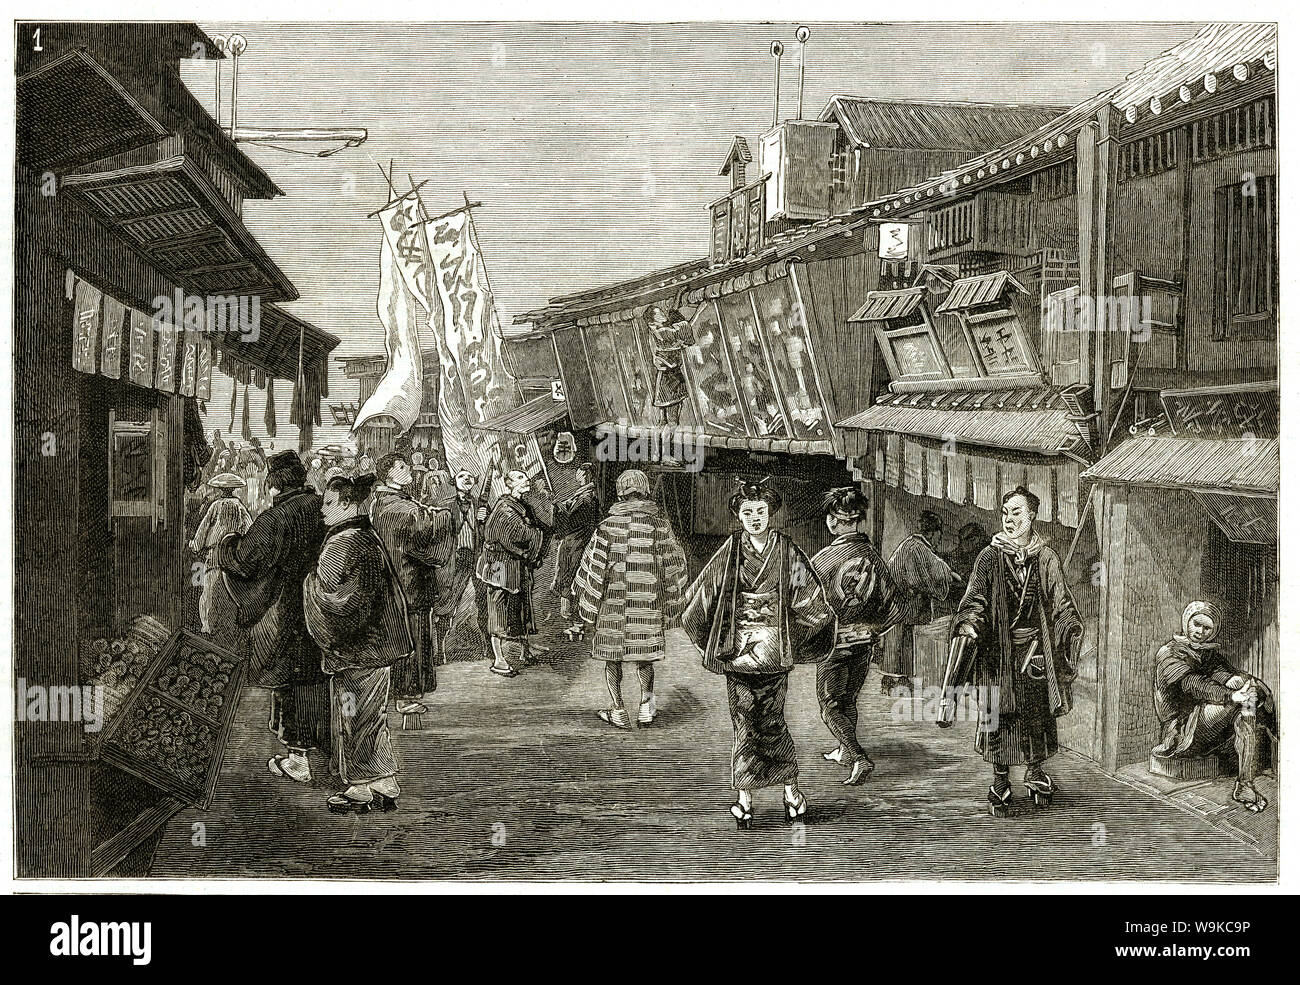 [ 1880s Japan -  Street View with Theater, Kyoto ] —   Street view of Kyoto. In the background a theater is visible.   Published in the British weekly illustrated newspaper The Graphic on July 1, 1882 (Meiji 15). Artwork by Canadian painter and illustrator Charles Edwin Fripp (1854-1906).  19th century vintage newspaper illustration. Stock Photo